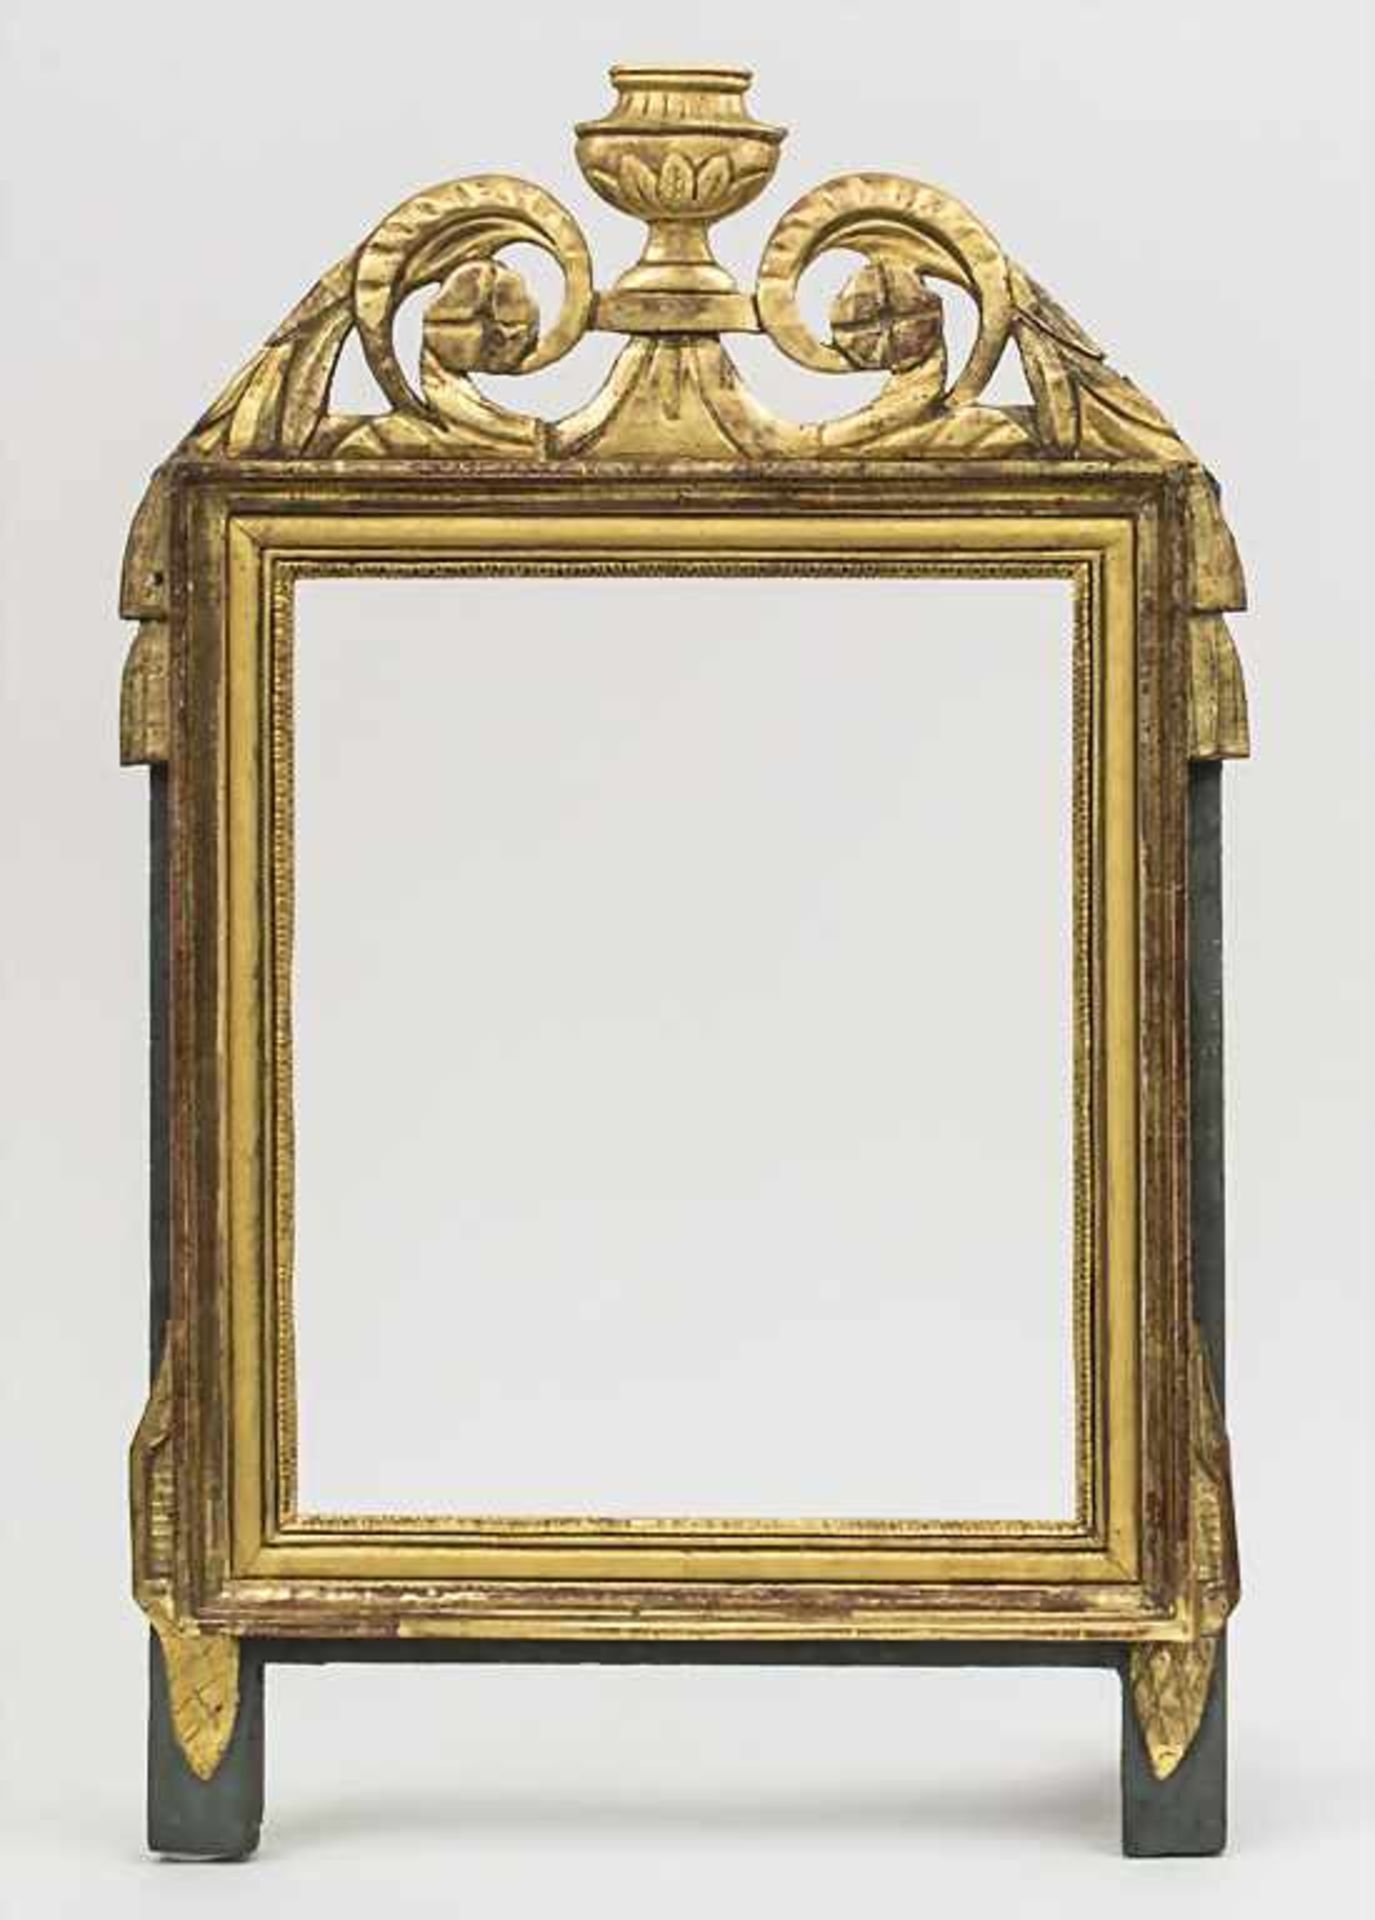 Rahmen mit Vasendekor / A frame decorated with a vase, 18./19. Jh. Material: Holz, geschnitzt,